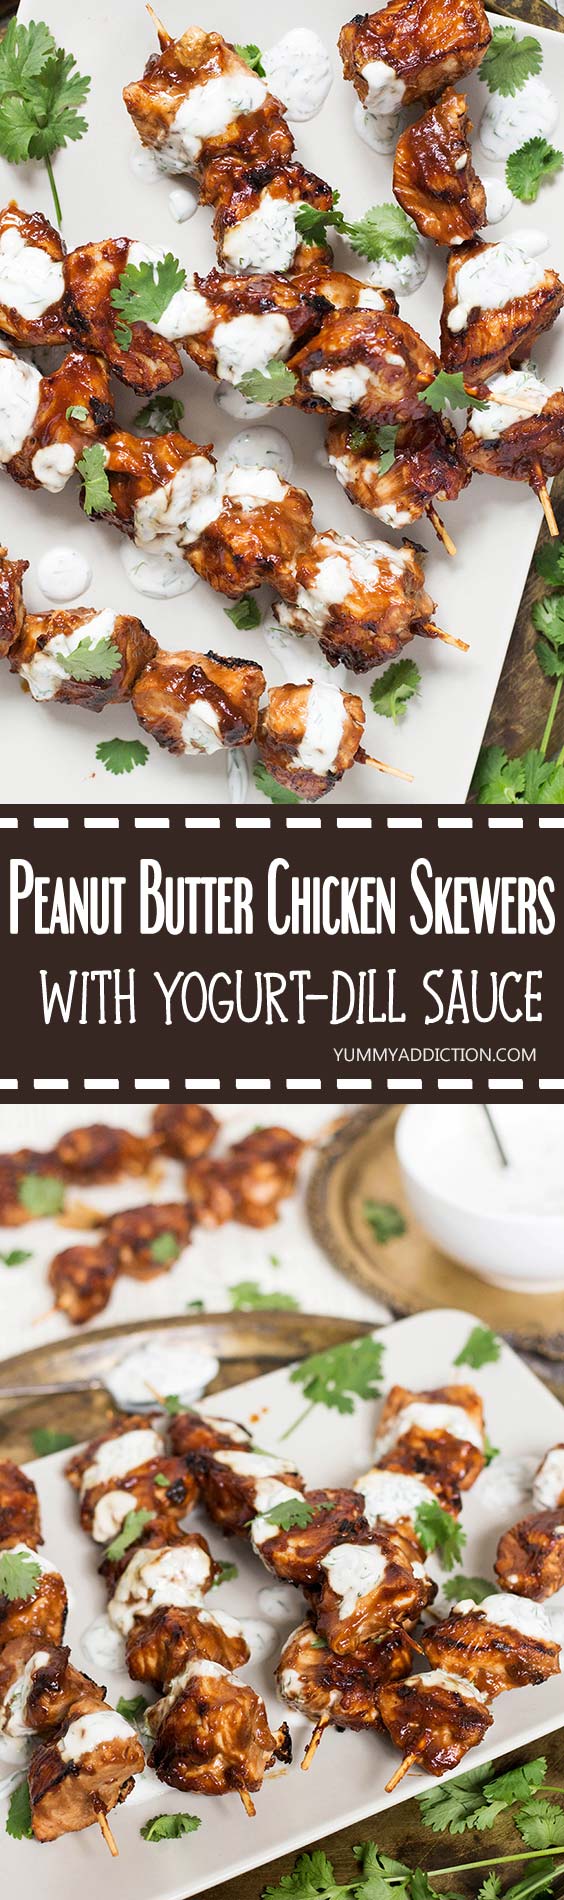 Peanut Butter Chicken is a perfect choice when you need some variety. Weaved onto skewers and served alongside a yogurt-dill sauce, it makes for a fantastic dinner! | yummyaddiction.com